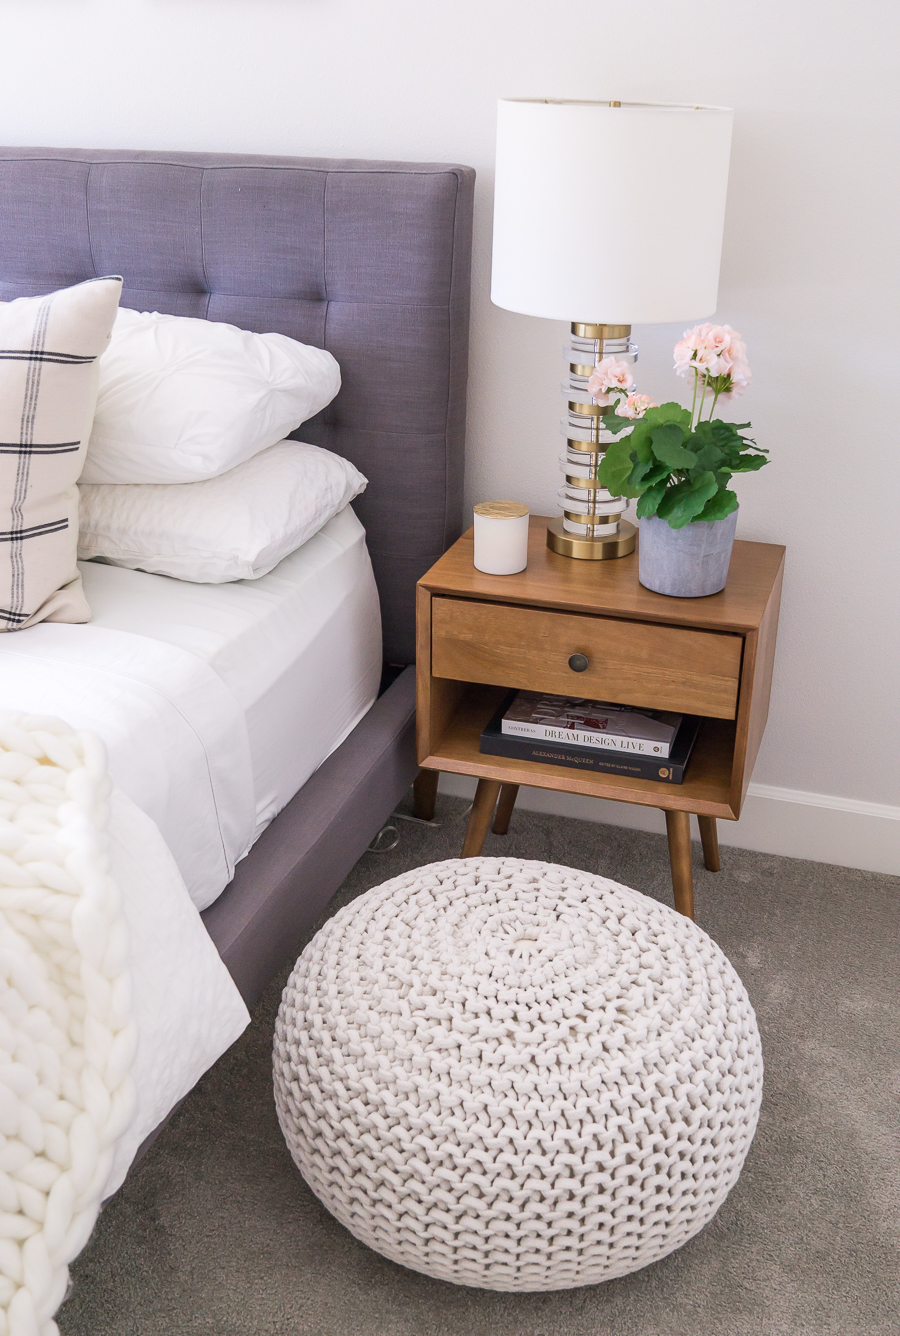 small guest bedroom makeover, midcentury modern bedroom, gray bed, mid-century modern nightstand, neutral bedroom, pouf